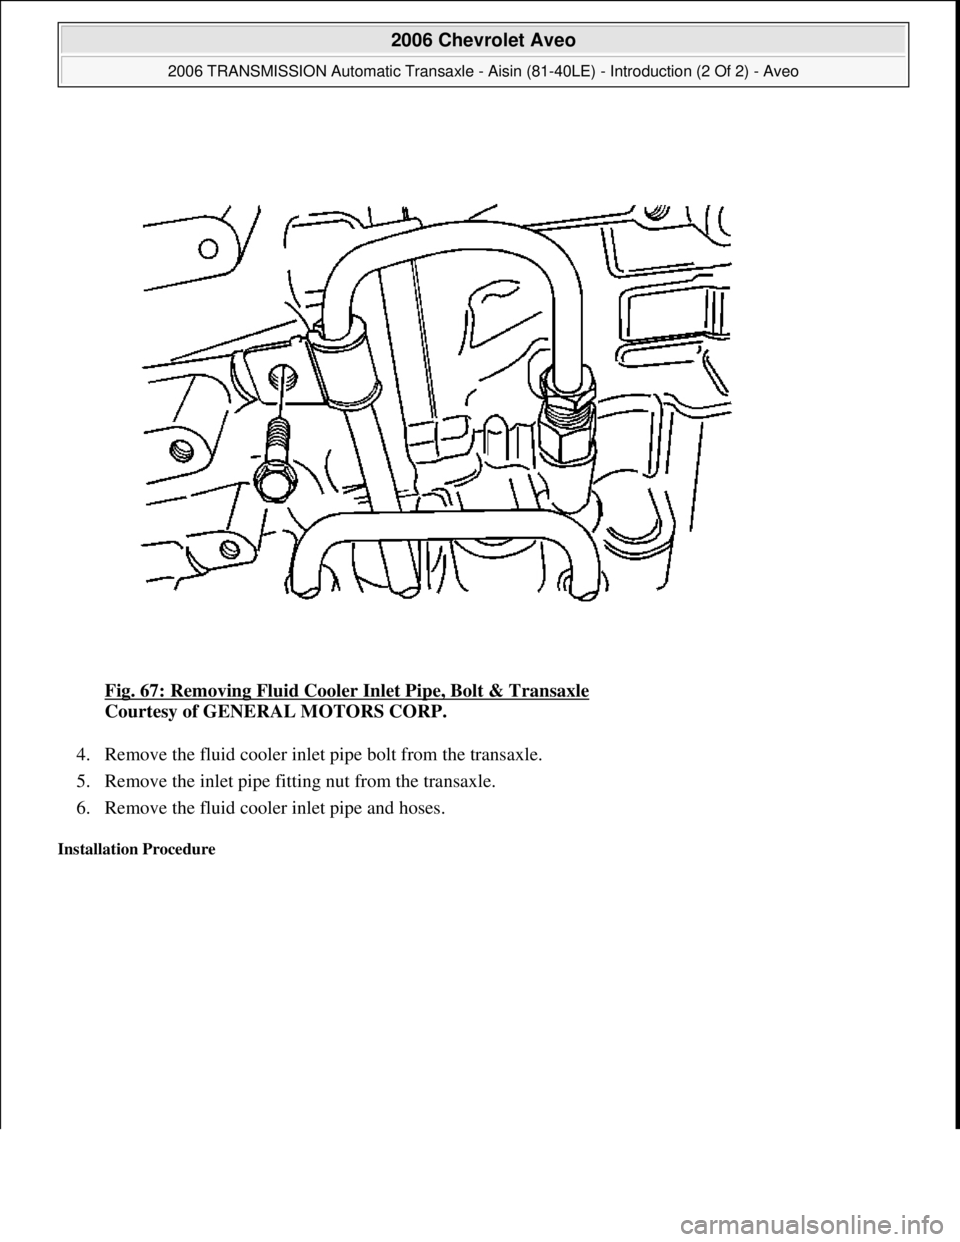 CHEVROLET AVEO 2002  Service User Guide Fig. 67: Removing Fluid Cooler Inlet Pipe, Bolt & Transaxle 
Courtesy of GENERAL MOTORS CORP. 
4. Remove the fluid cooler inlet pipe bolt from the transaxle.  
5. Remove the inlet pipe fitting nut fro